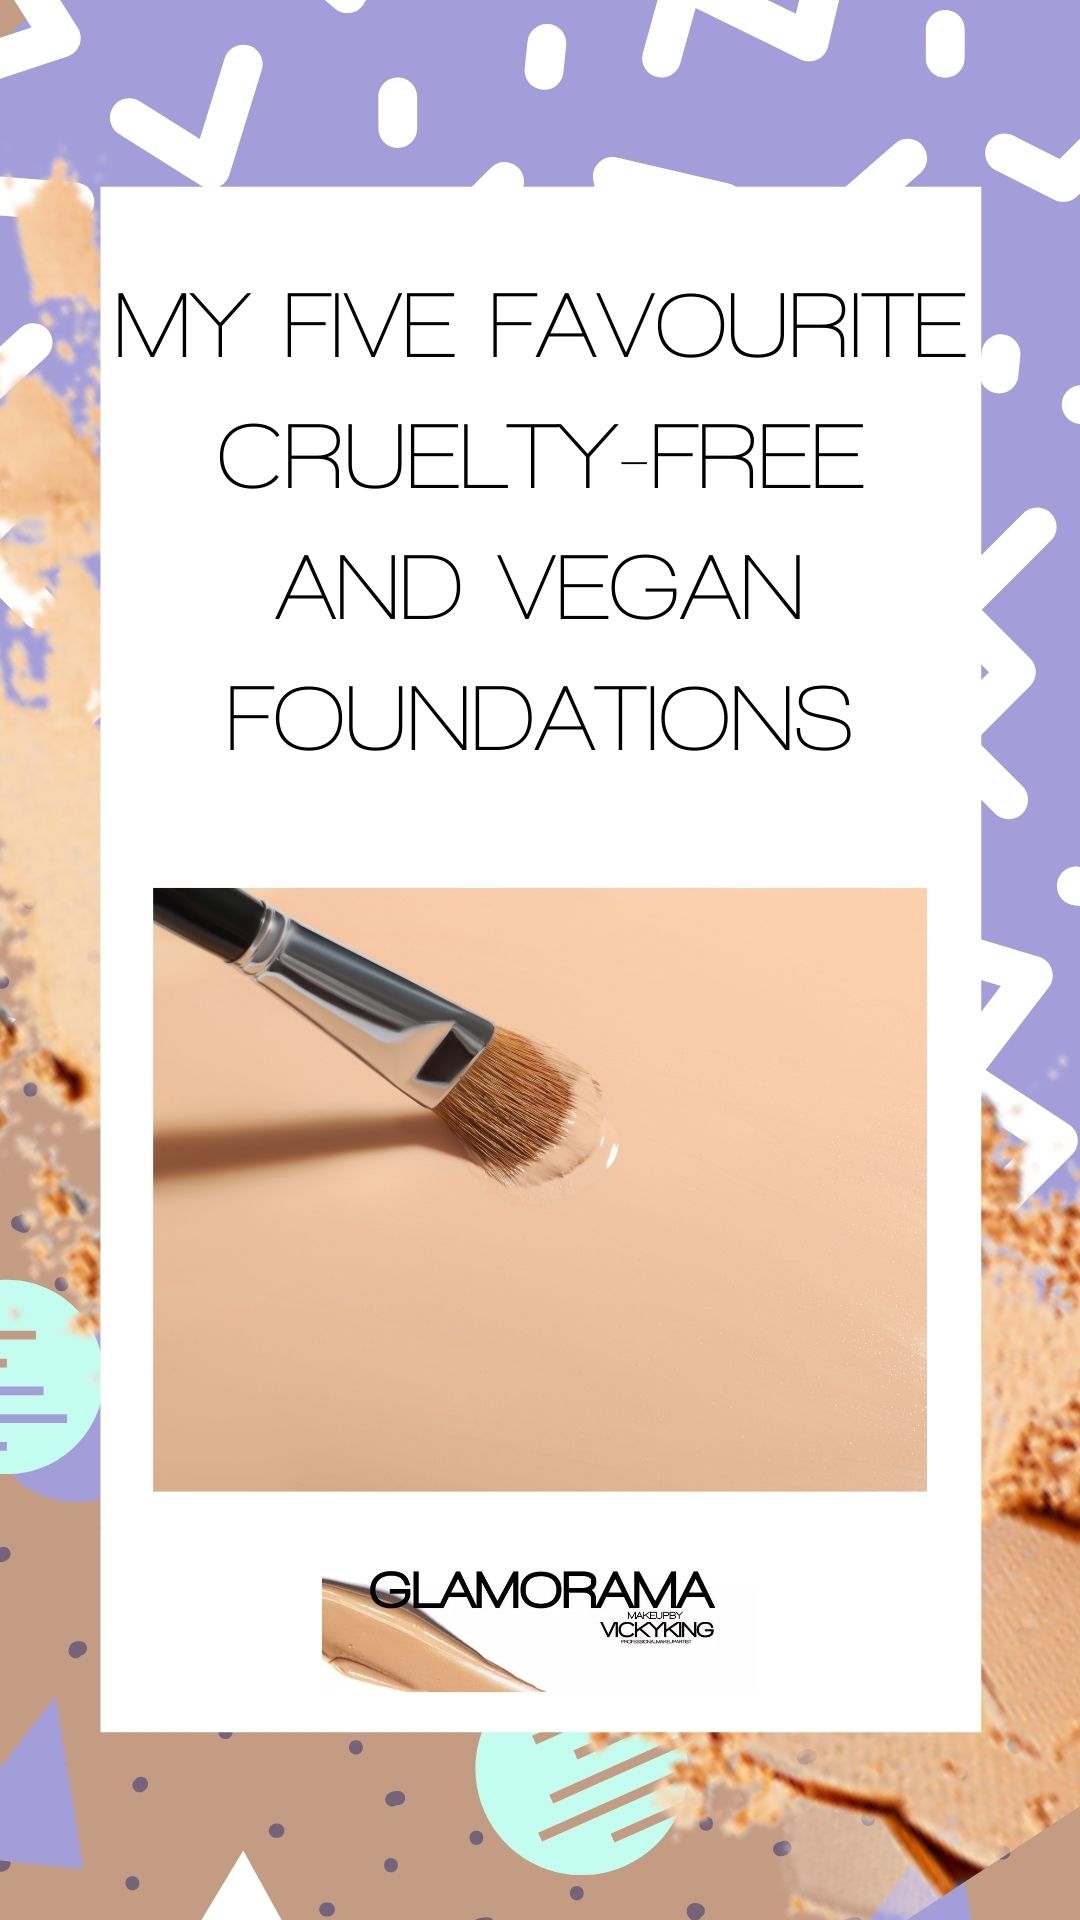 My Five Favourite Cruelty-free and Vegan Foundations